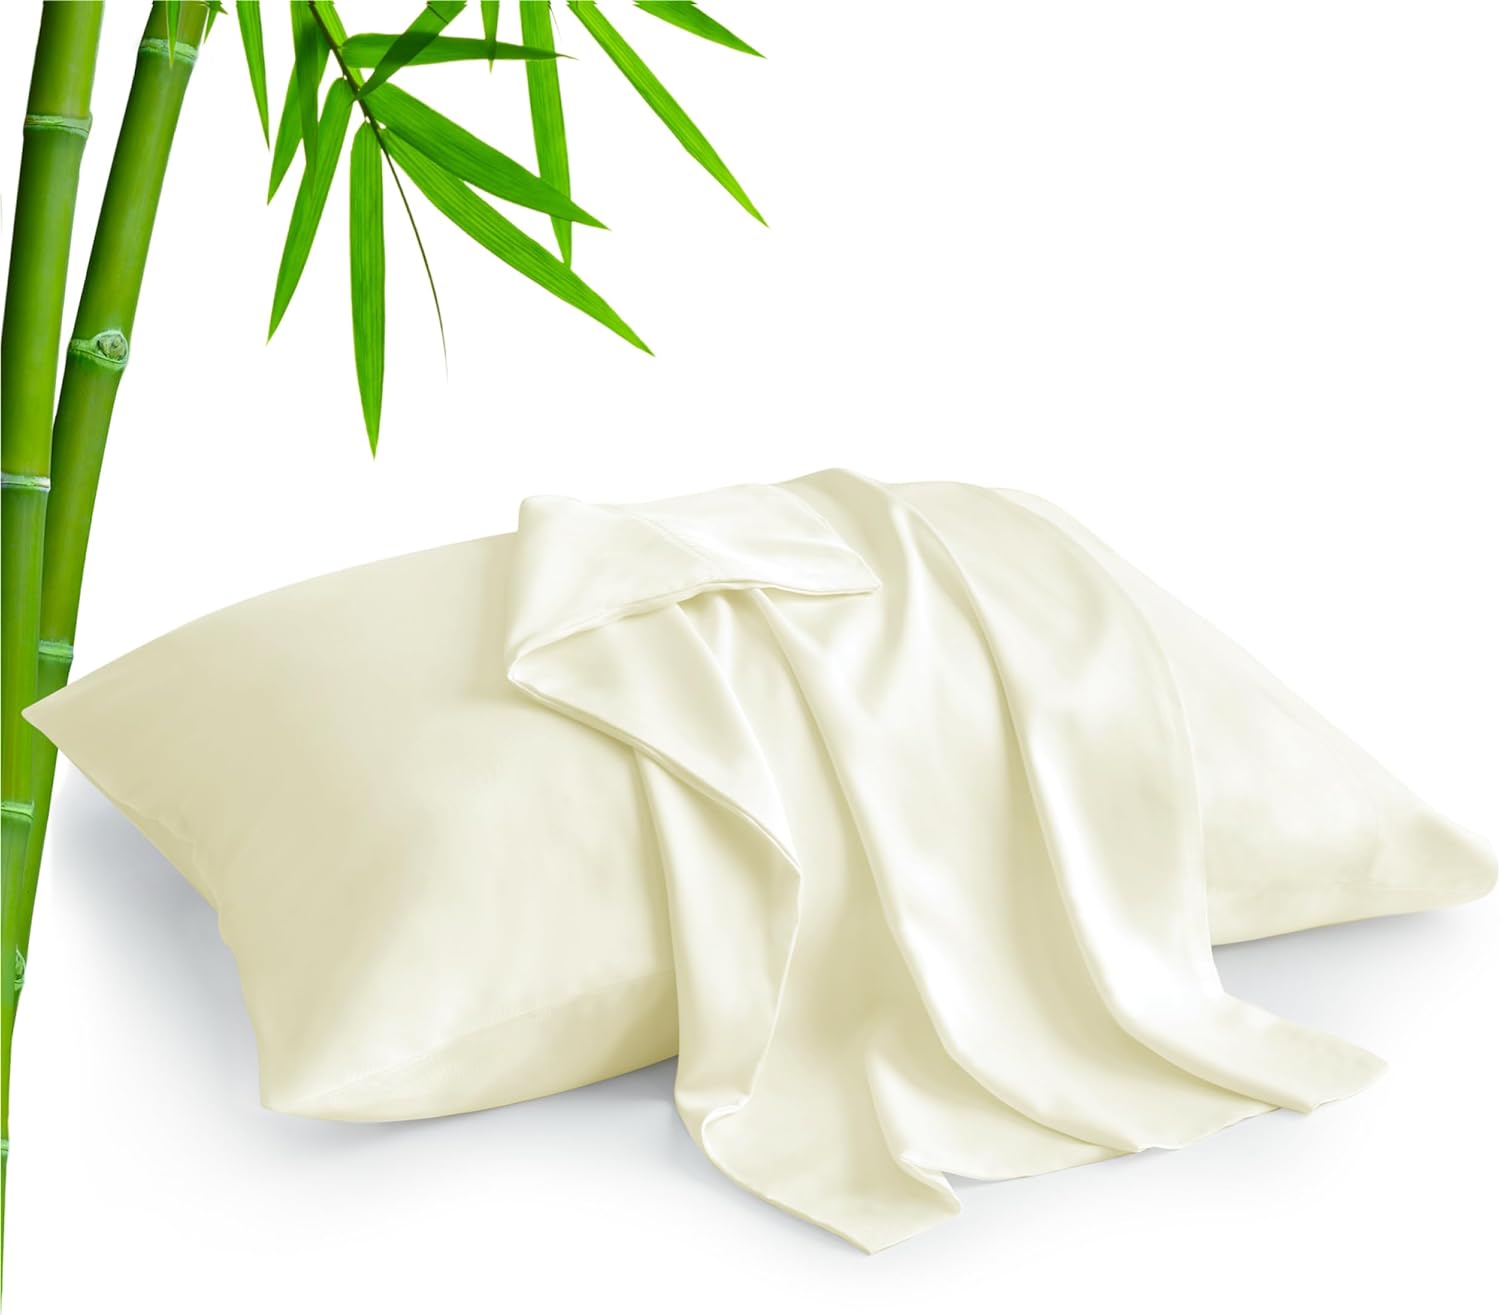 Its a great case, love thats its made from bamboo fibers. It fits and stays in place well, and washes well. Can get a tad wrinkled on the underside but they quickly fade with a flip of the pillow and some time. A great price too